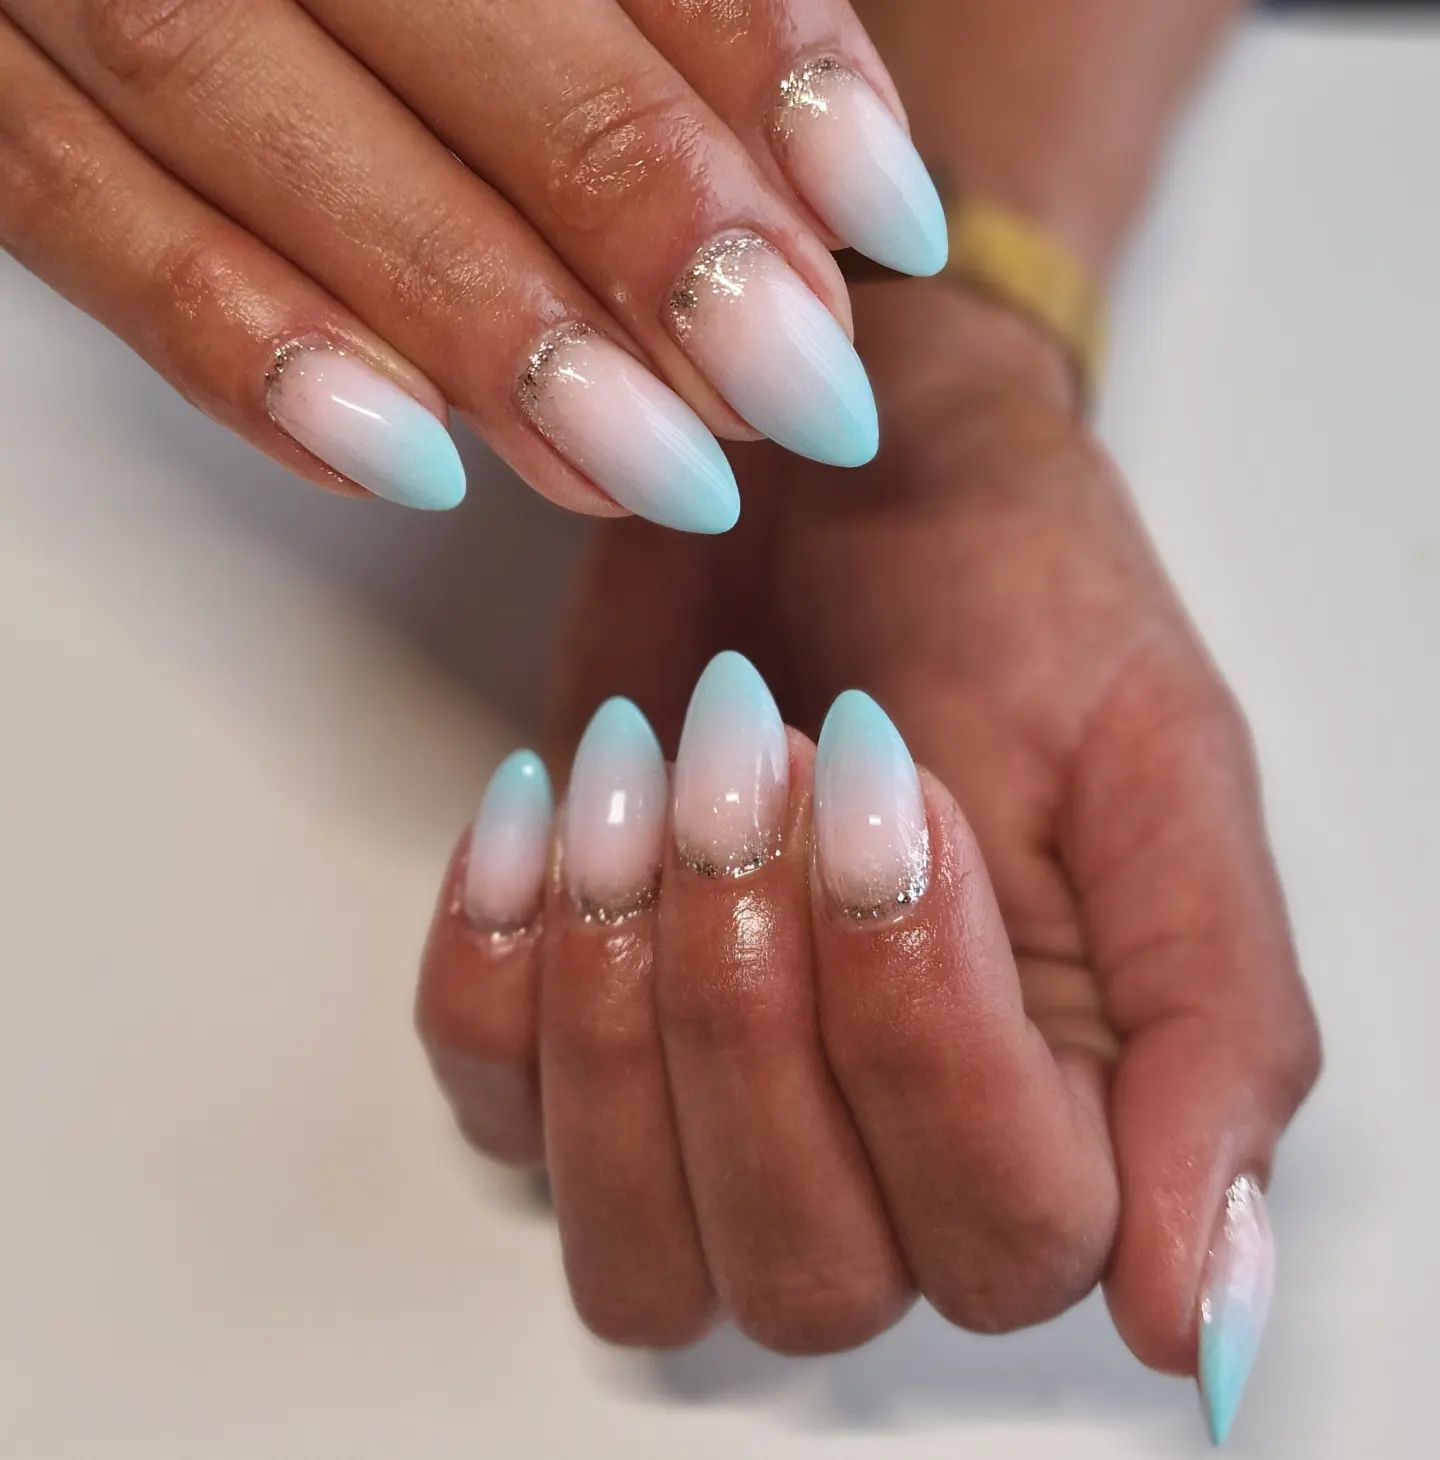  These ombre nails that light blue gets darker to the tips can be taken to a new level with some shiny glitters on top of your nails.